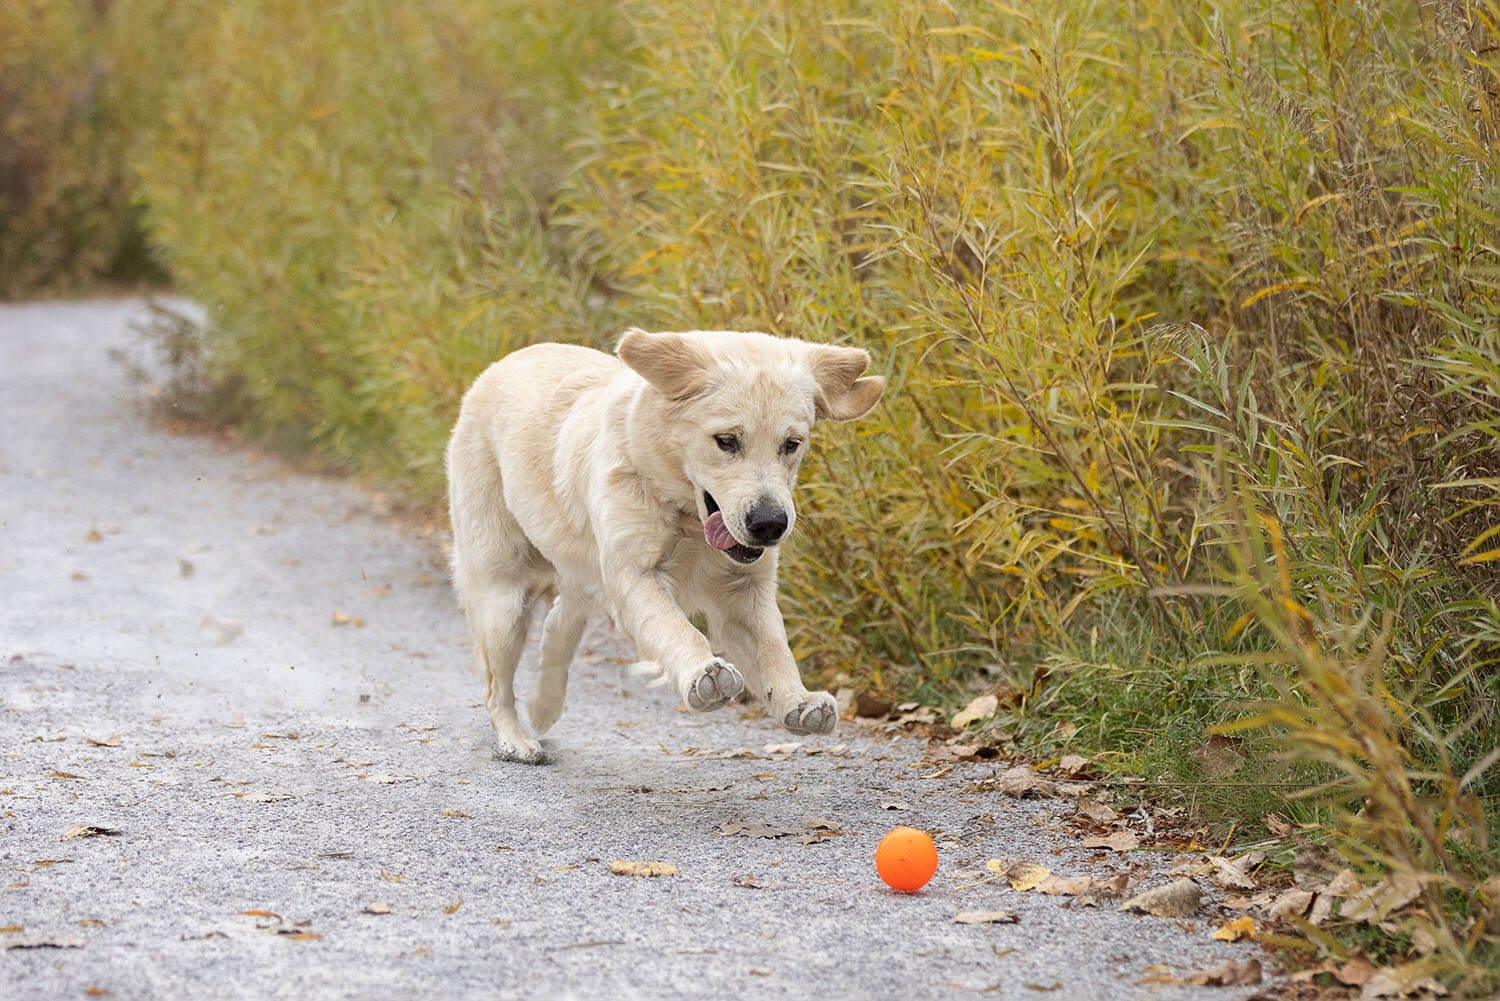  Benny the Golden Retriever chasing a ball during his photo session 